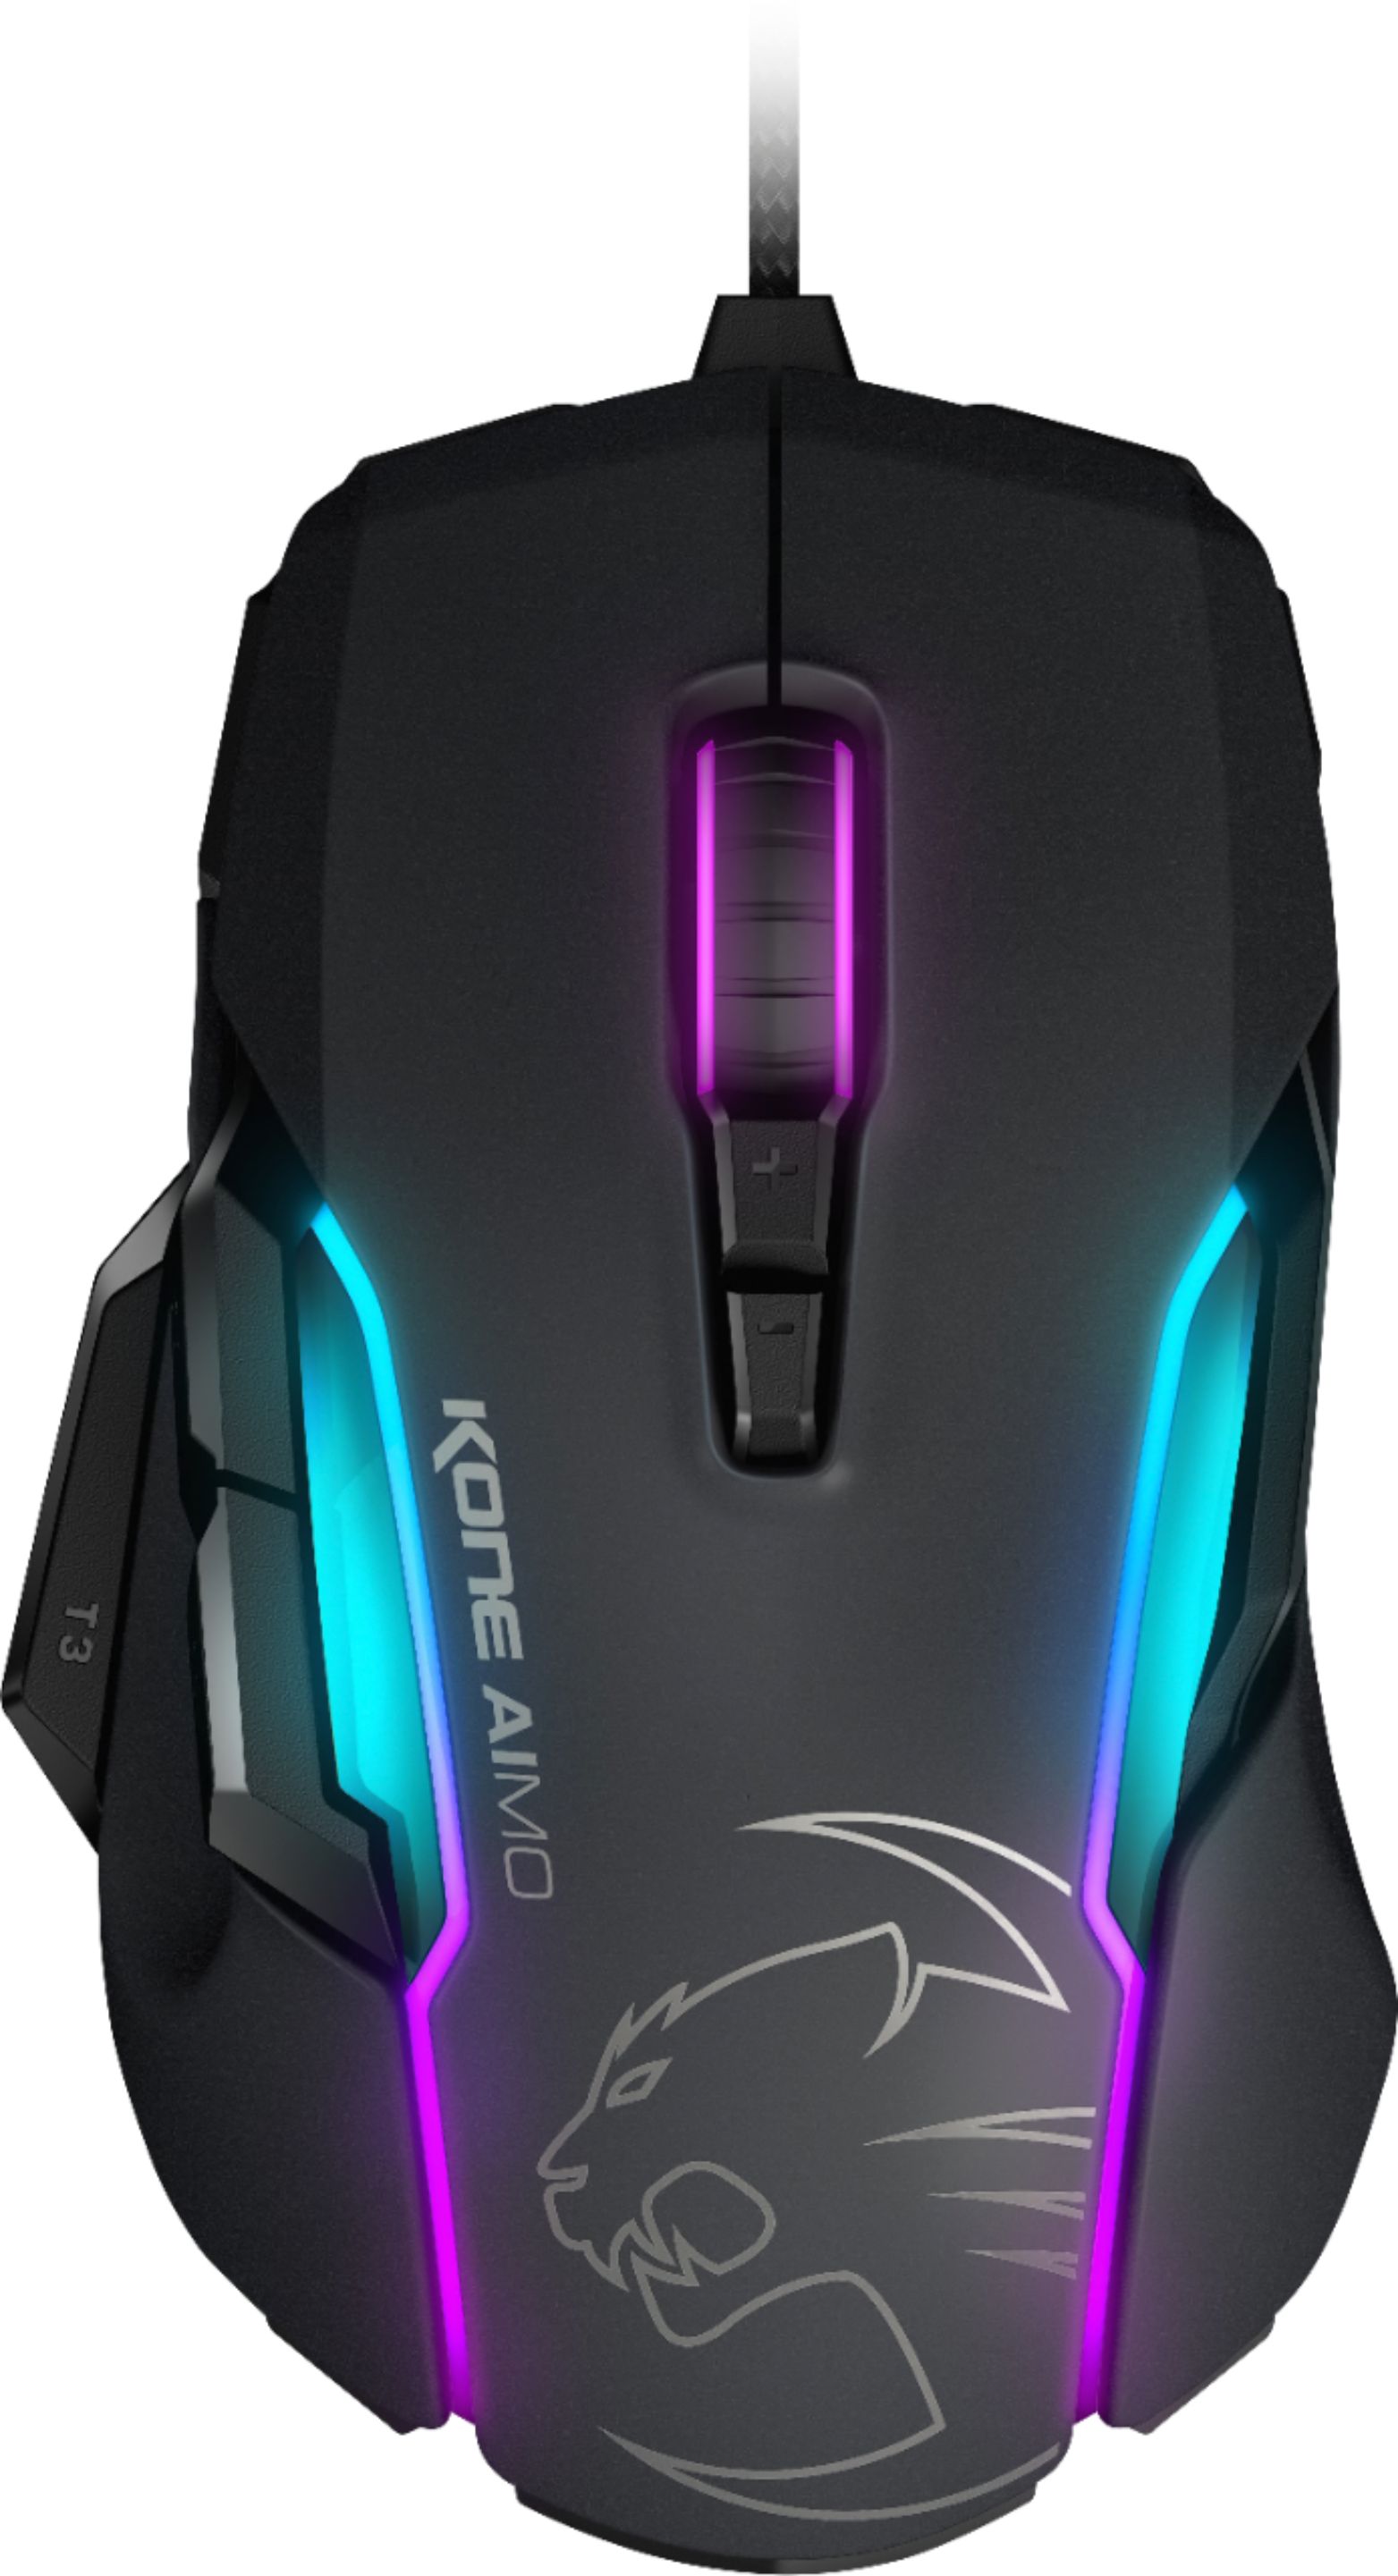 Roccat Kone Aimo Wired Optical Gaming Mouse Black Roc 11 815 Bk Best Buy